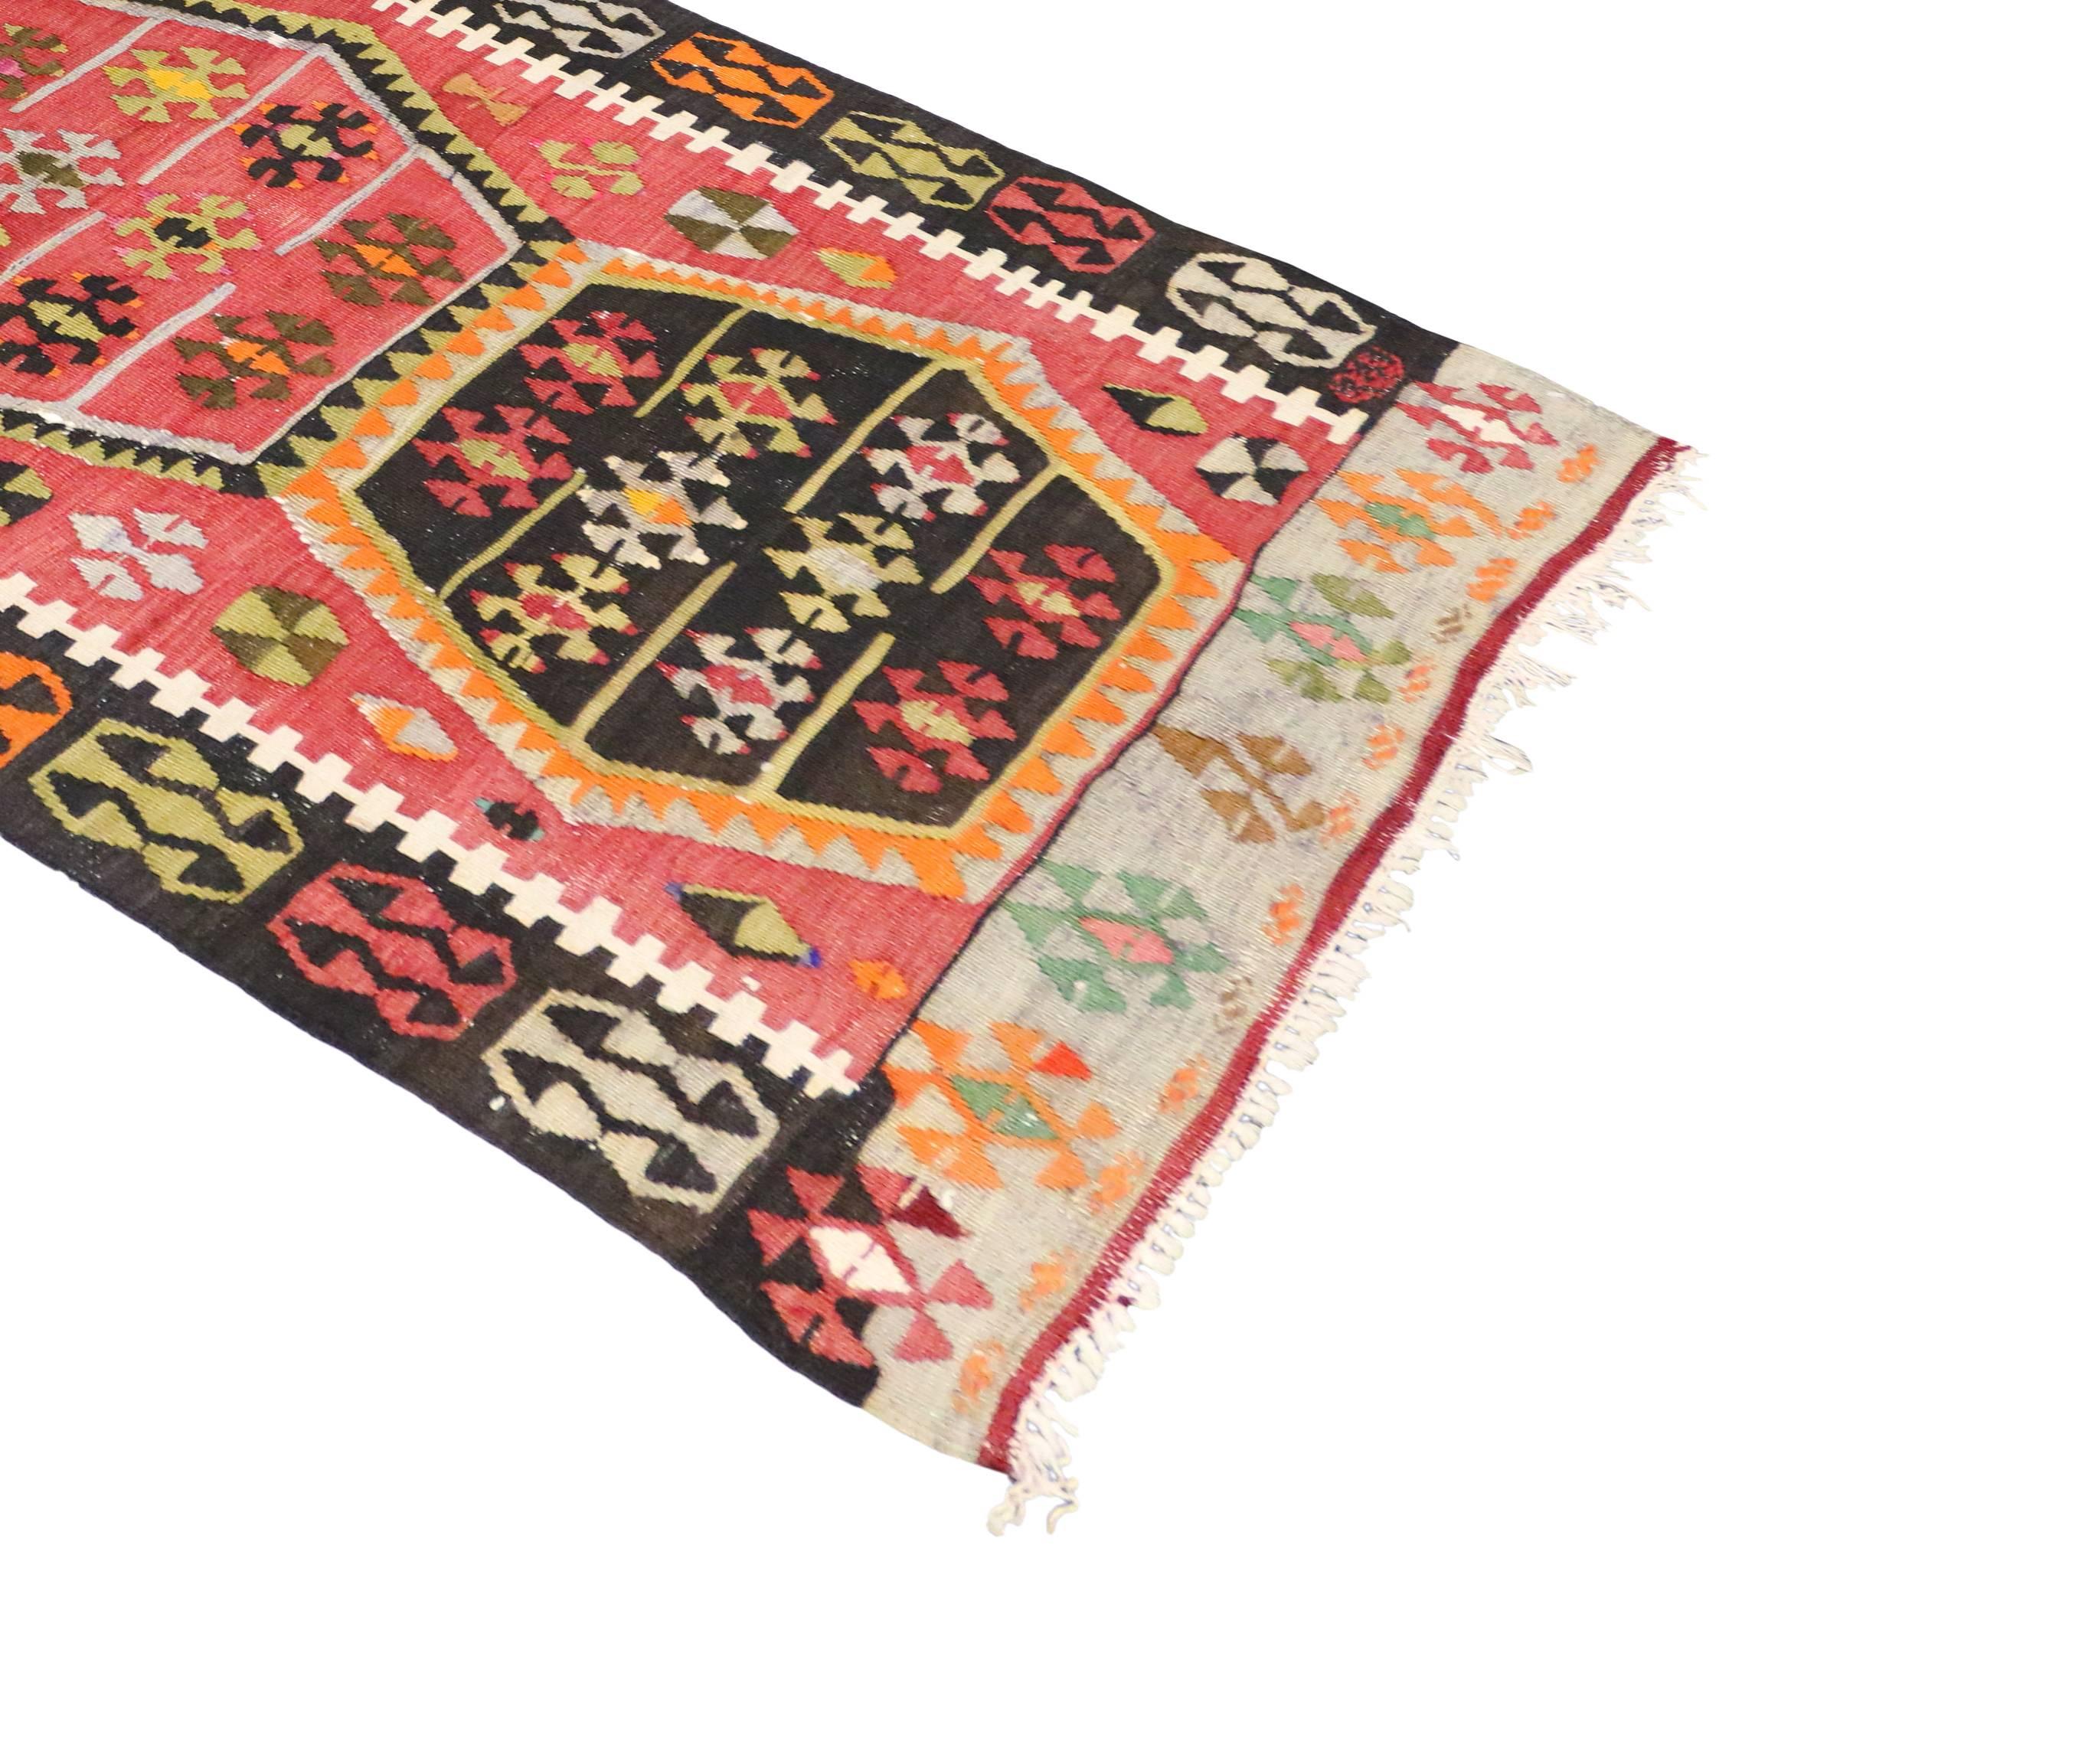 74052, vintage Turkish Kilim tribal runner, extra long hallway runner. This boho chic extra-long Kilim runner is anything but boring. Made from hand-woven wool vintage Turkish Kilim runner features an allover geometric pattern in vibrant colors. A